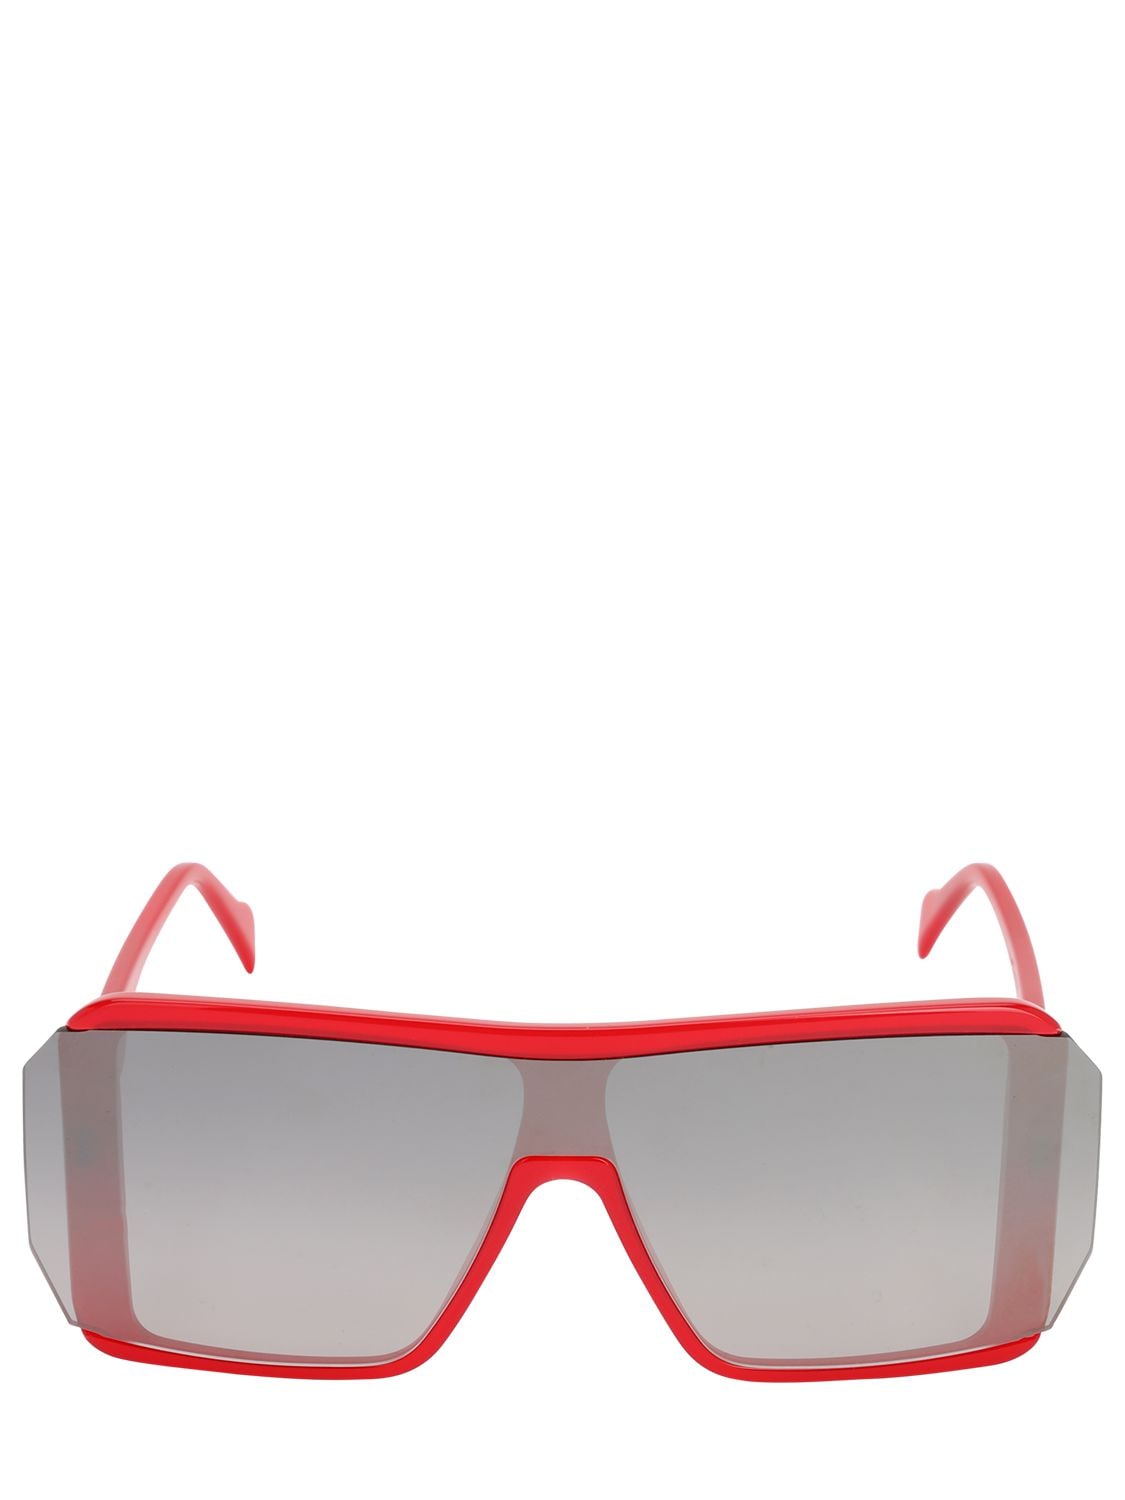 Andy Wolf Berthe Squared Acetate Sunglasses In Red,black